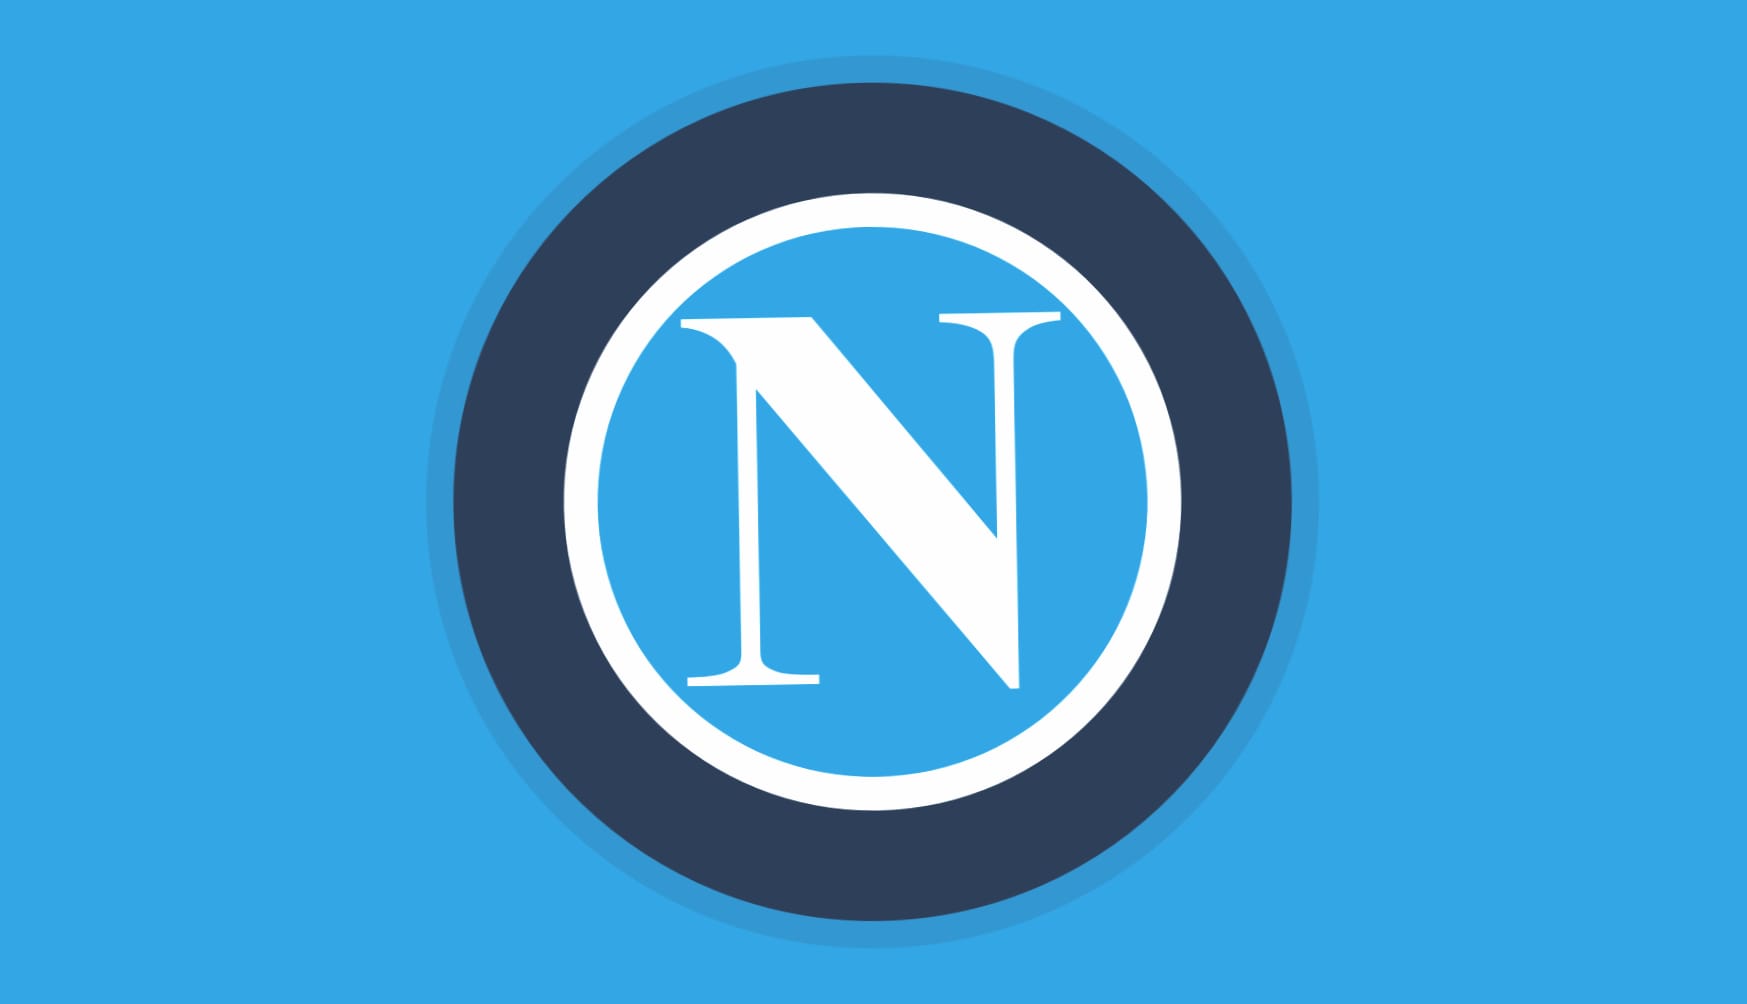 S.S.C. Napoli wallpapers HD quality